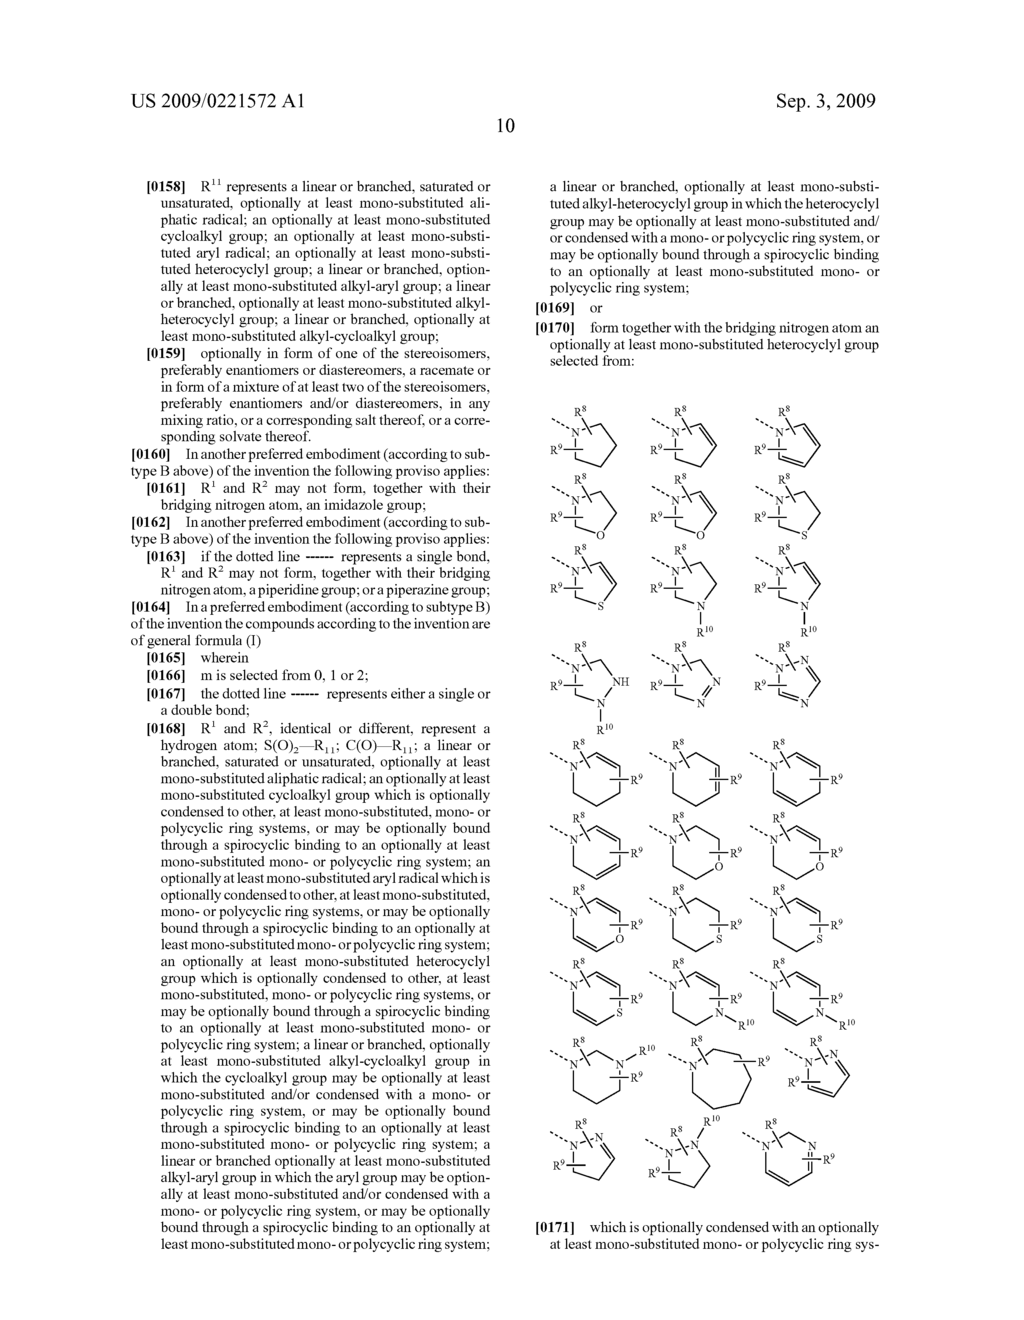 4,5,6,7-TETRAHYDROBENZO[B]THIOPHENE DERIVATIVES AND THEIR USE AS SIGMA RECEPTOR LIGANDS - diagram, schematic, and image 11